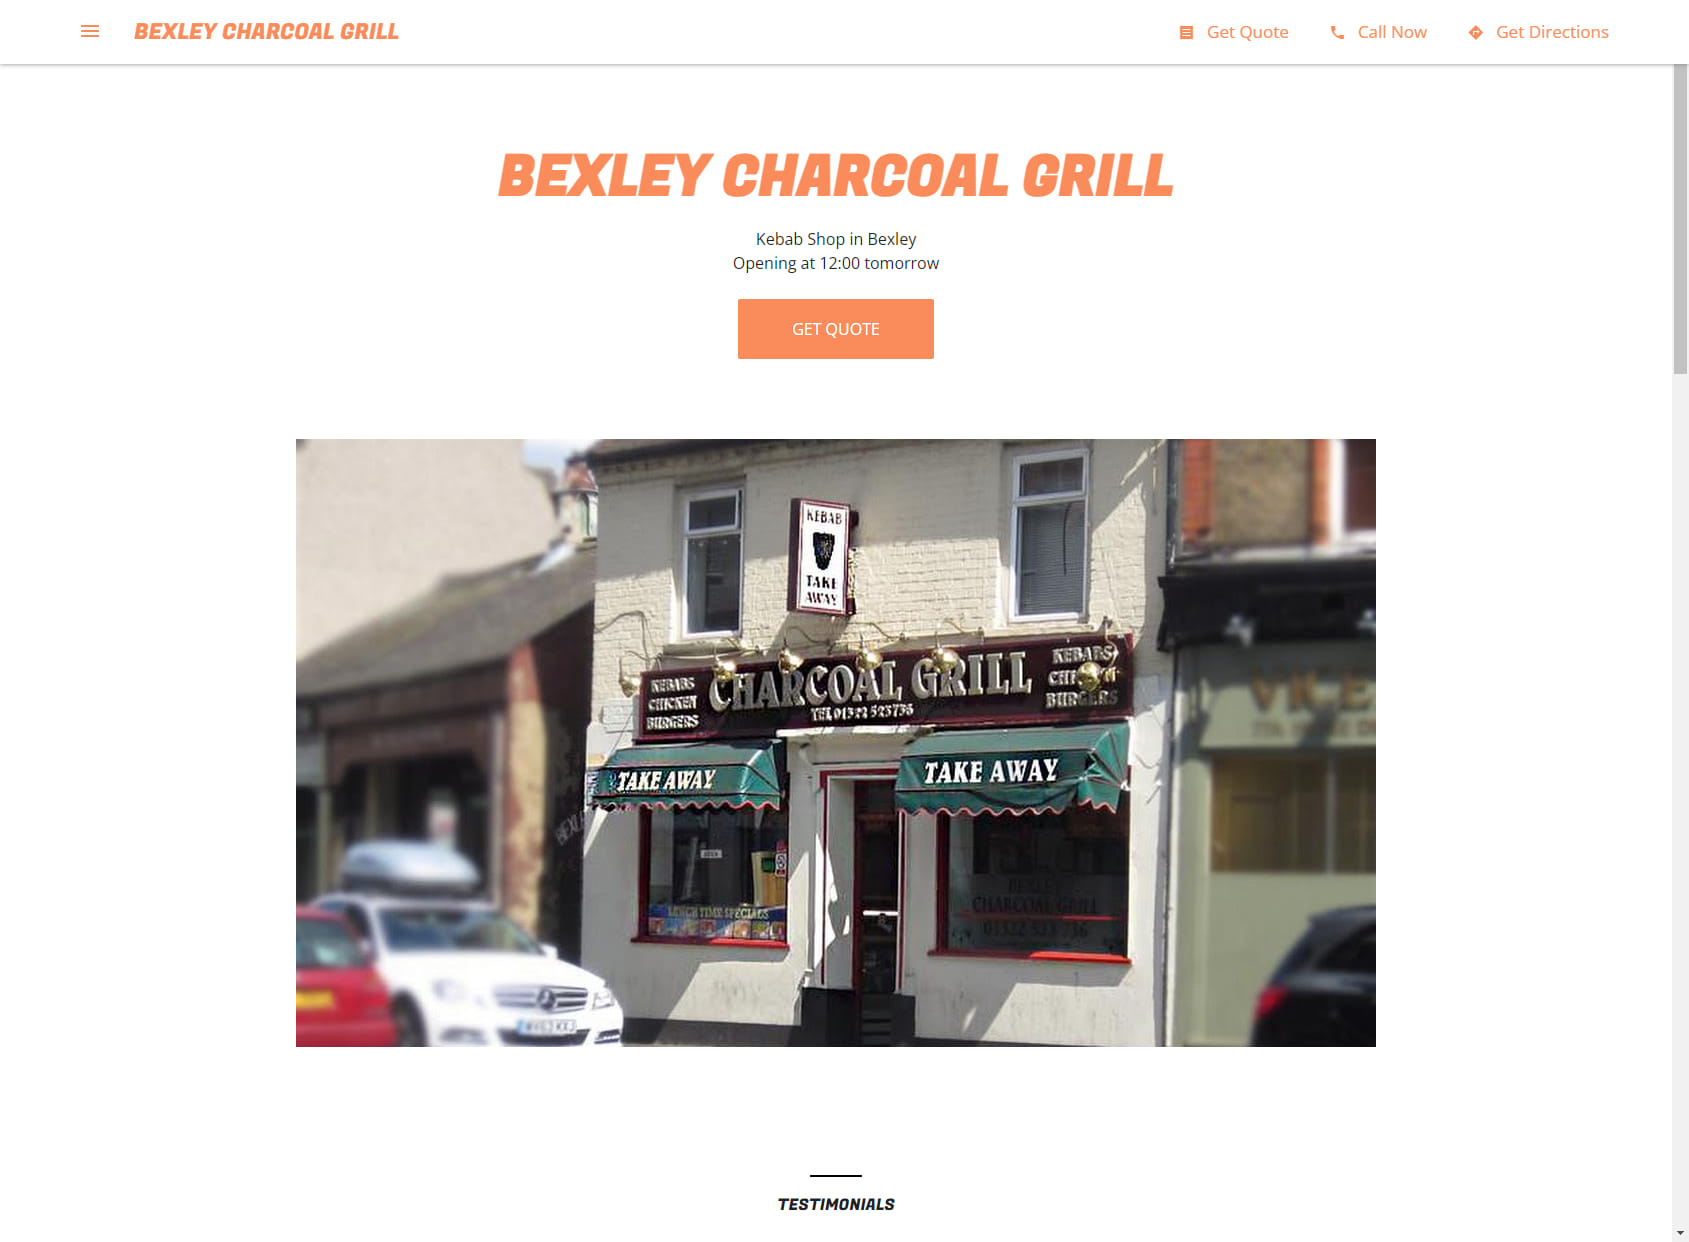 BEXLEY CHARCOAL GRILL